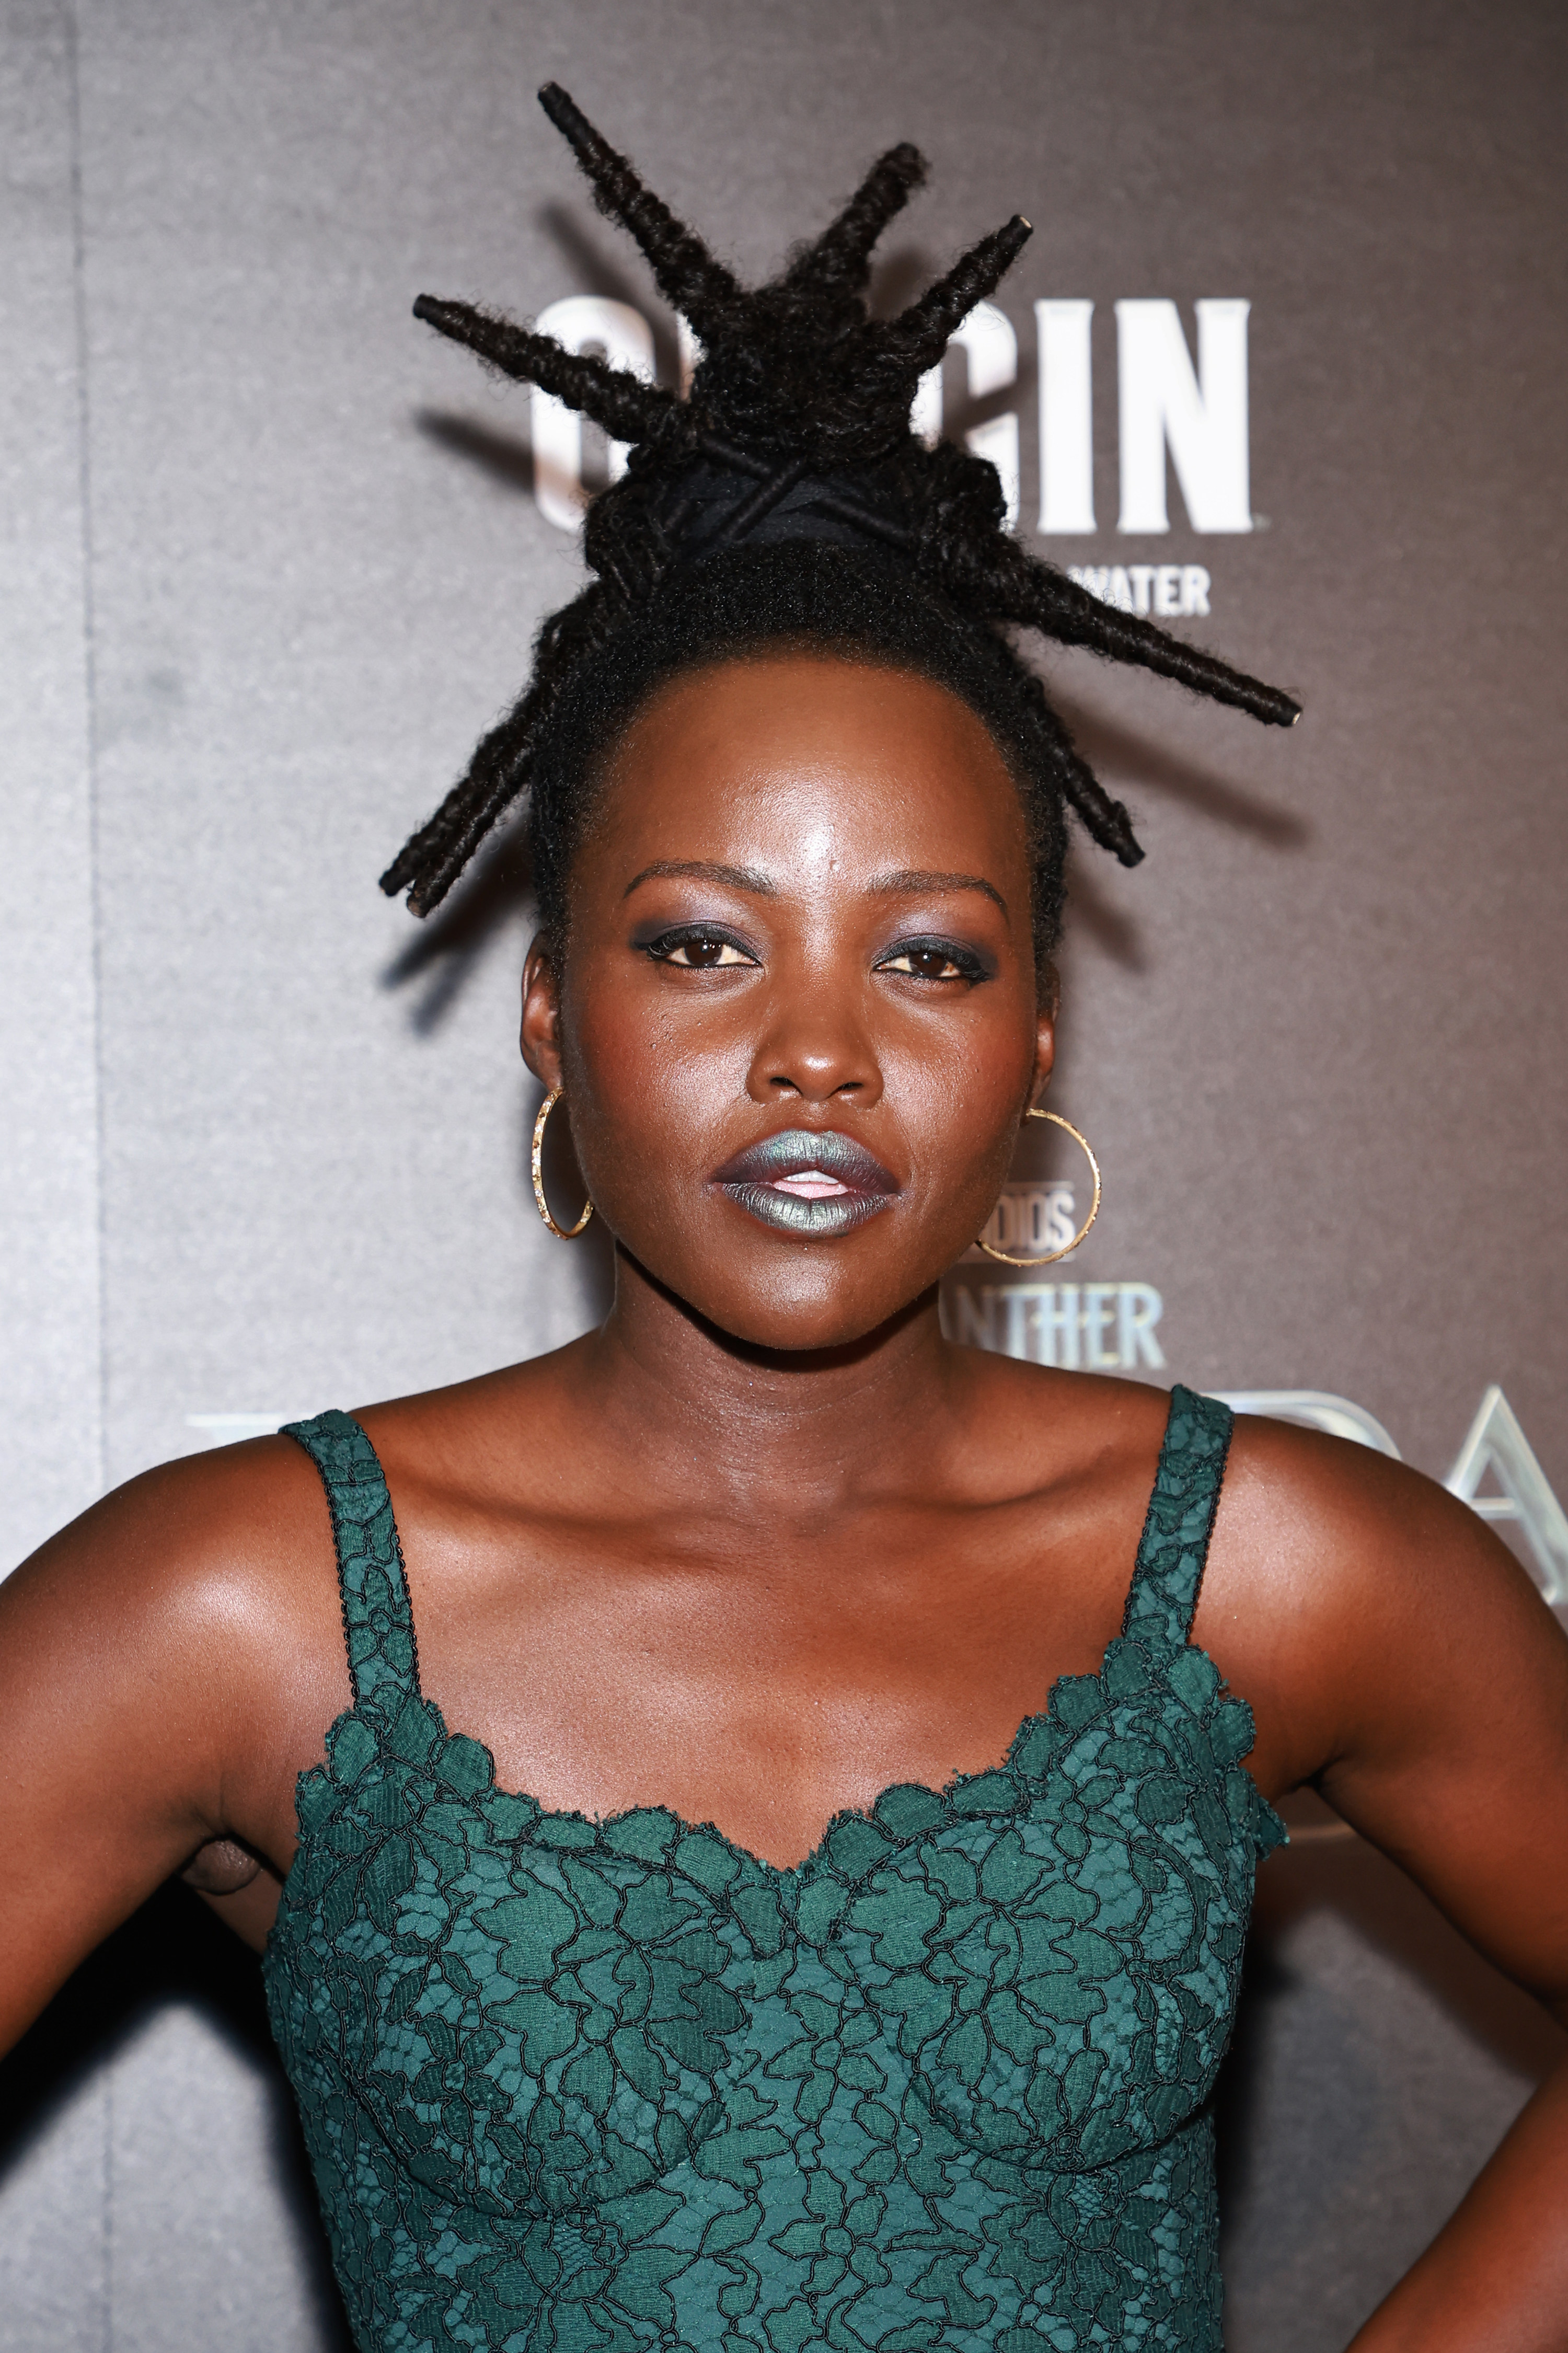 Lupita at a an event with her hair in an intricate spiked updo